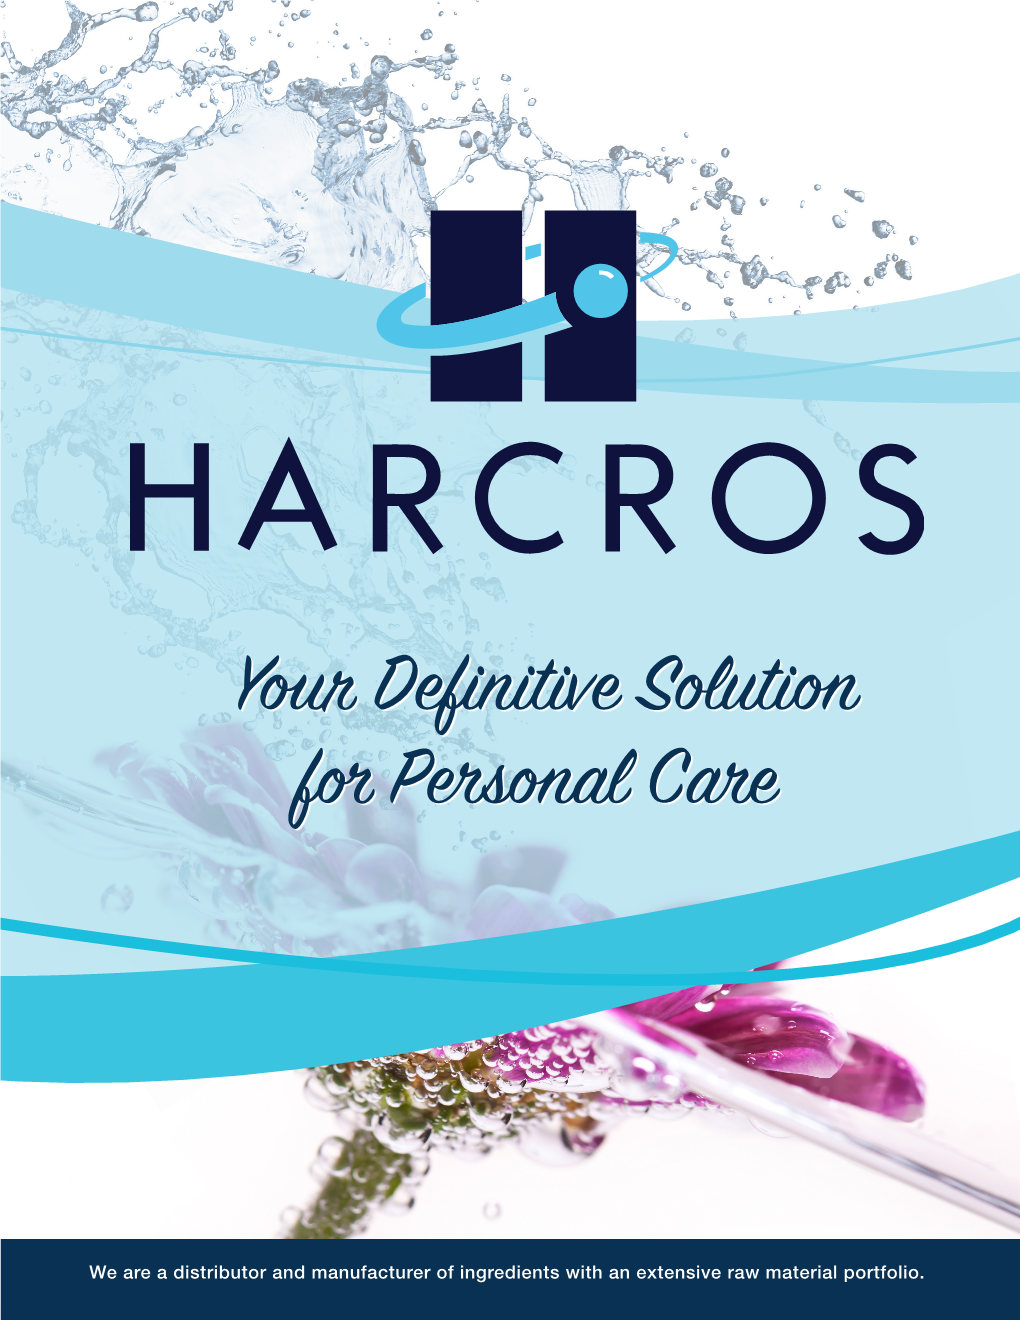 Your Definitive Solution for Personal Care